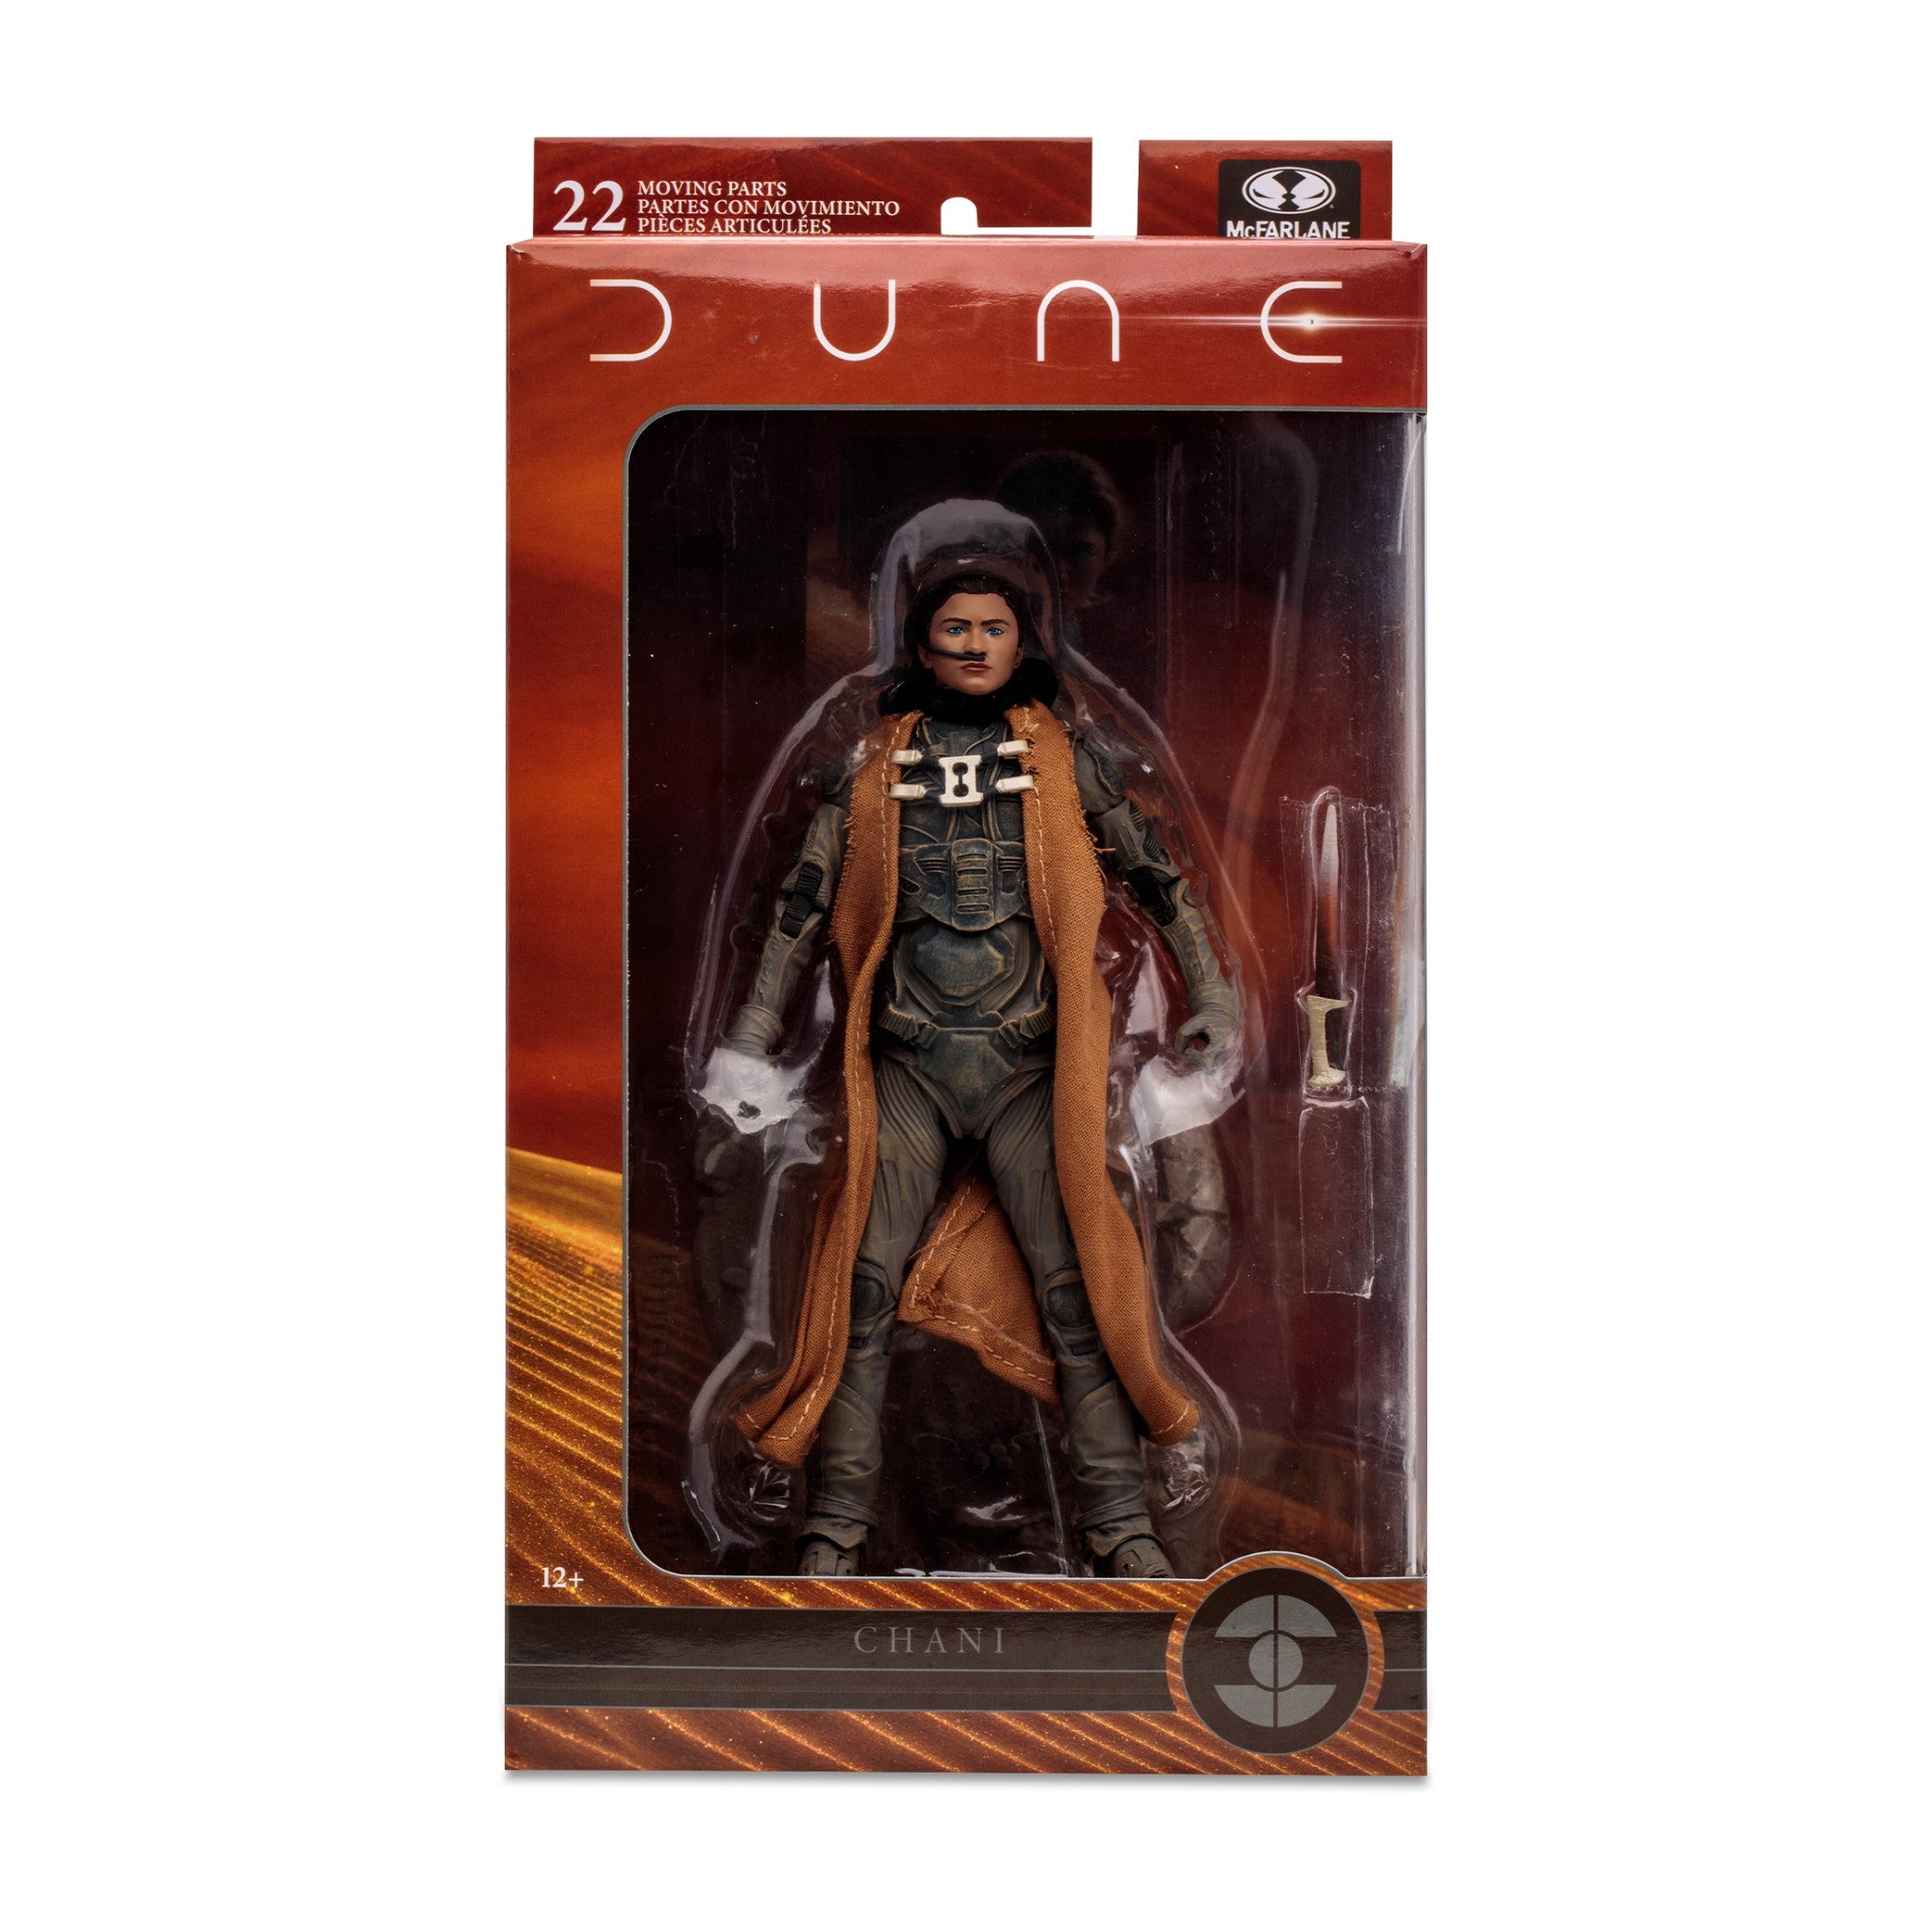 Dune Movie Part Two 2 Chani 7" Action Figure - McFarlane Toys